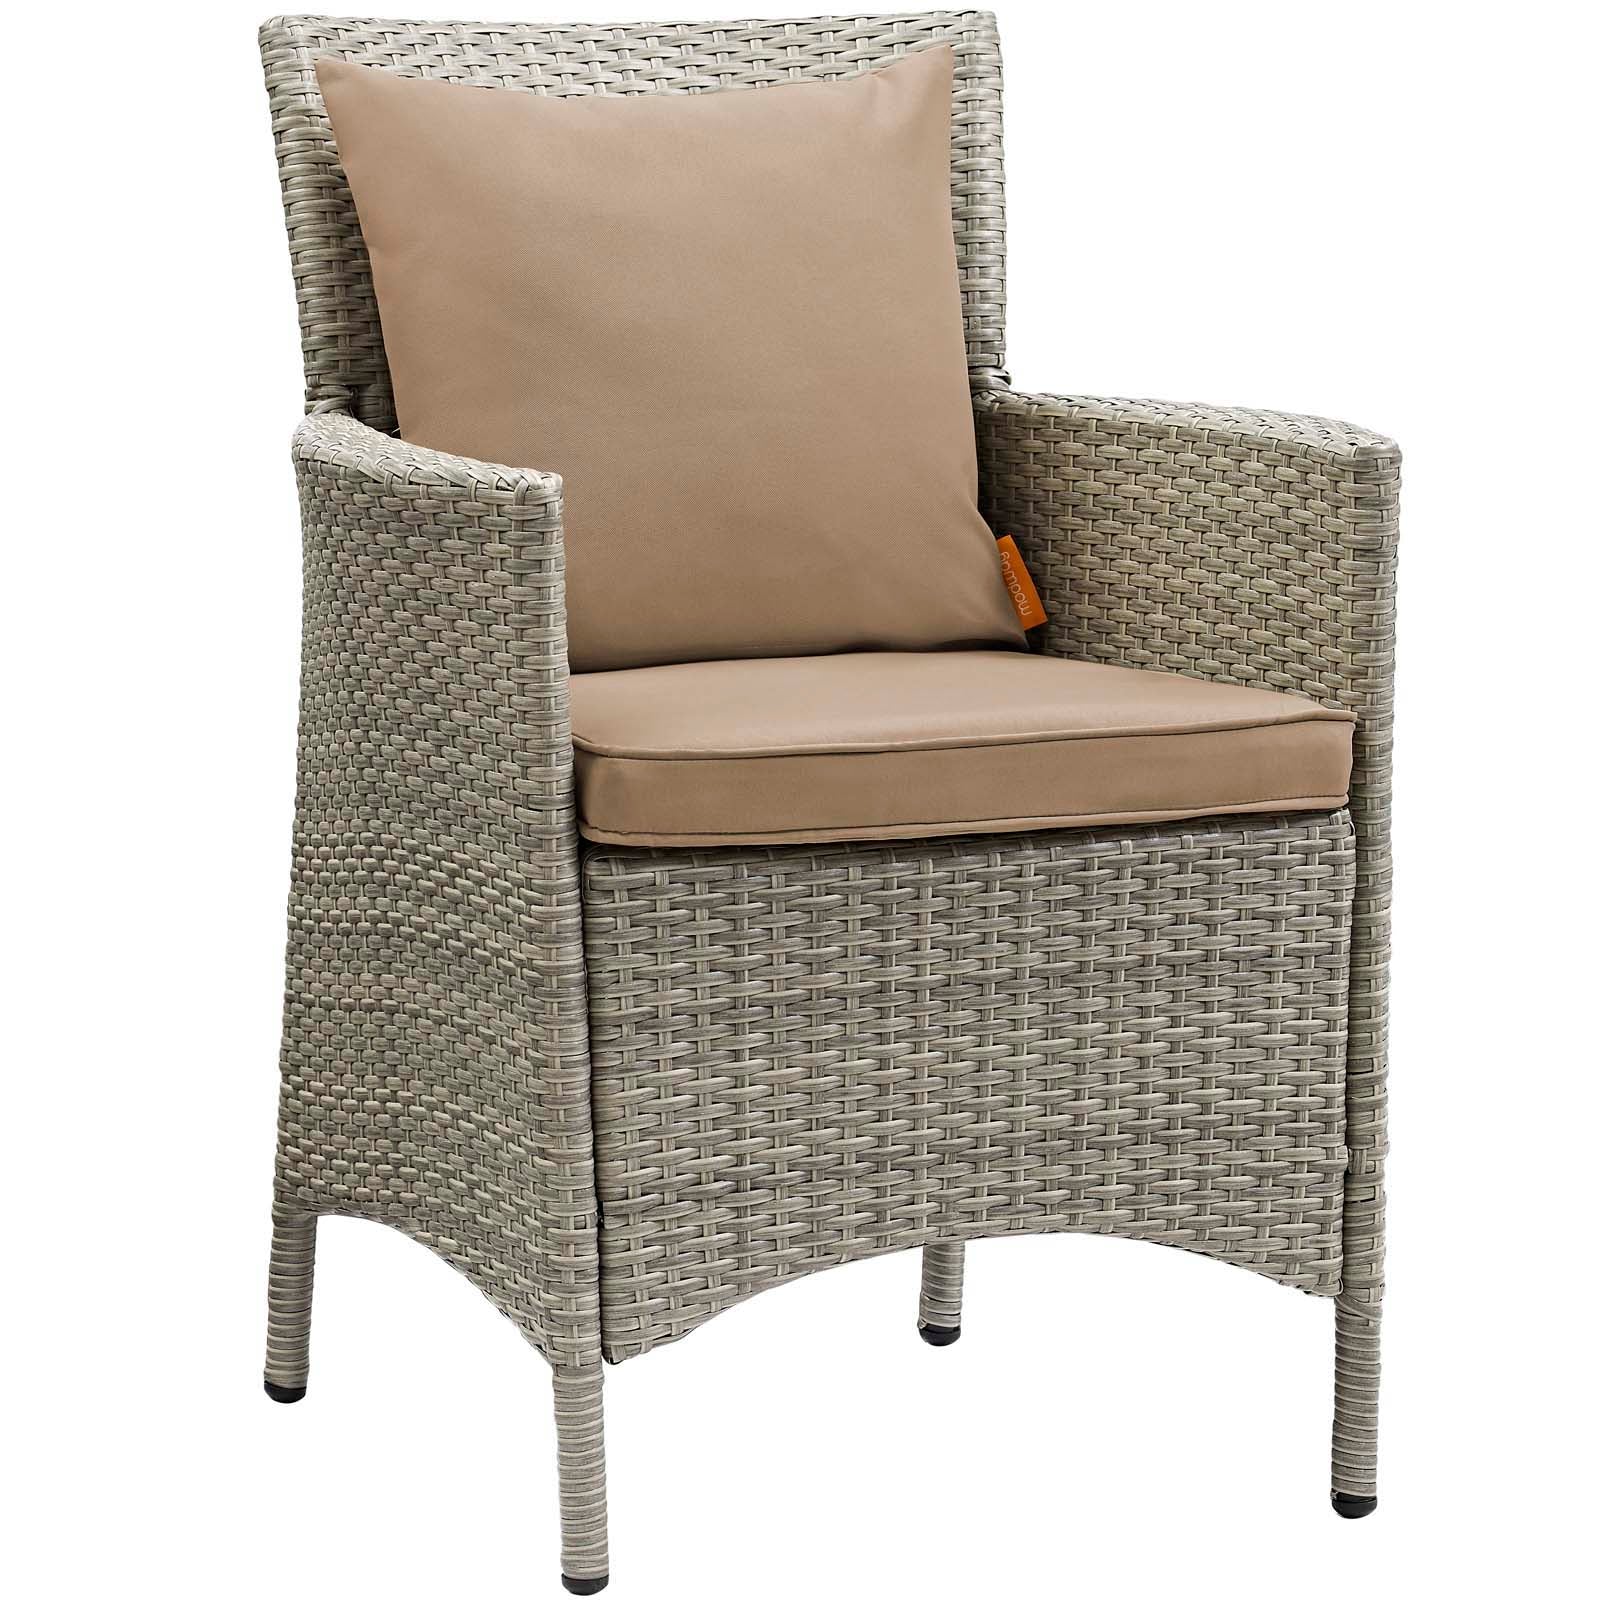 Modway Outdoor Dining Chairs - Conduit Outdoor Patio Wicker Rattan Dining Armchair Set of 2 Light Gray Mocha